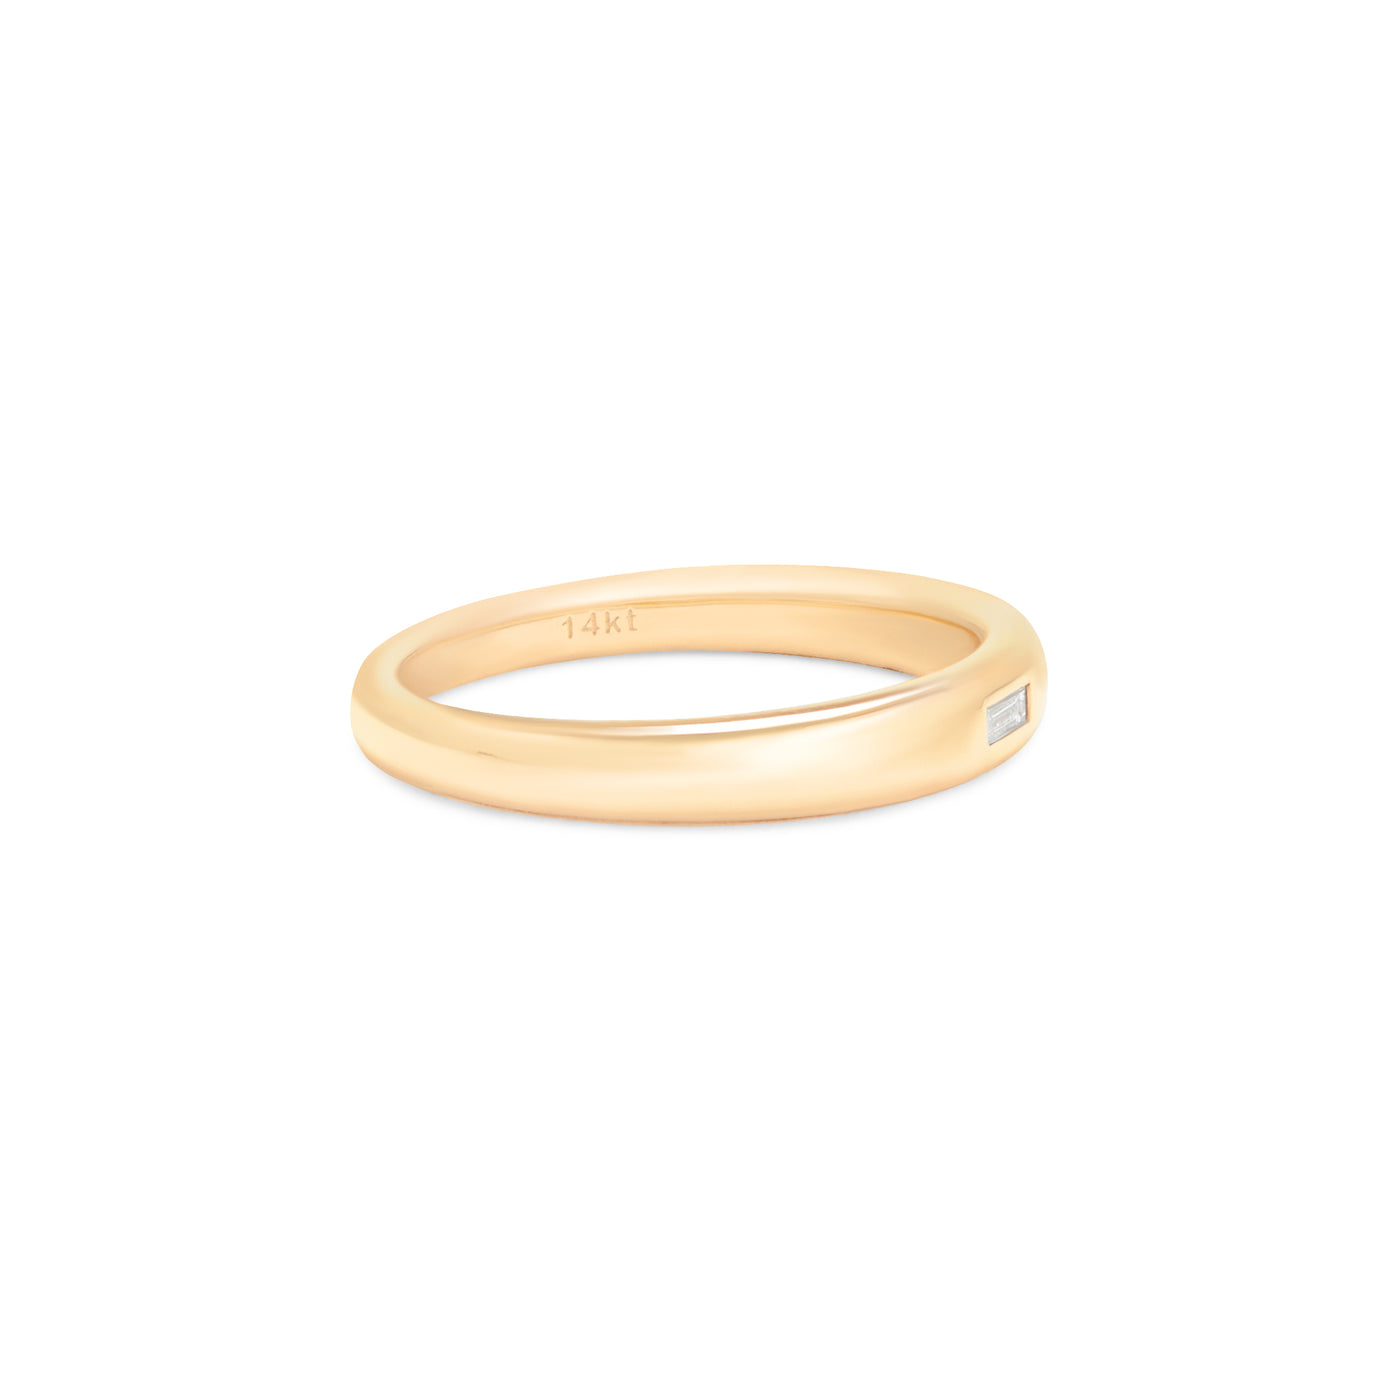 yellow gold ring with baguette diamond center stone on white background